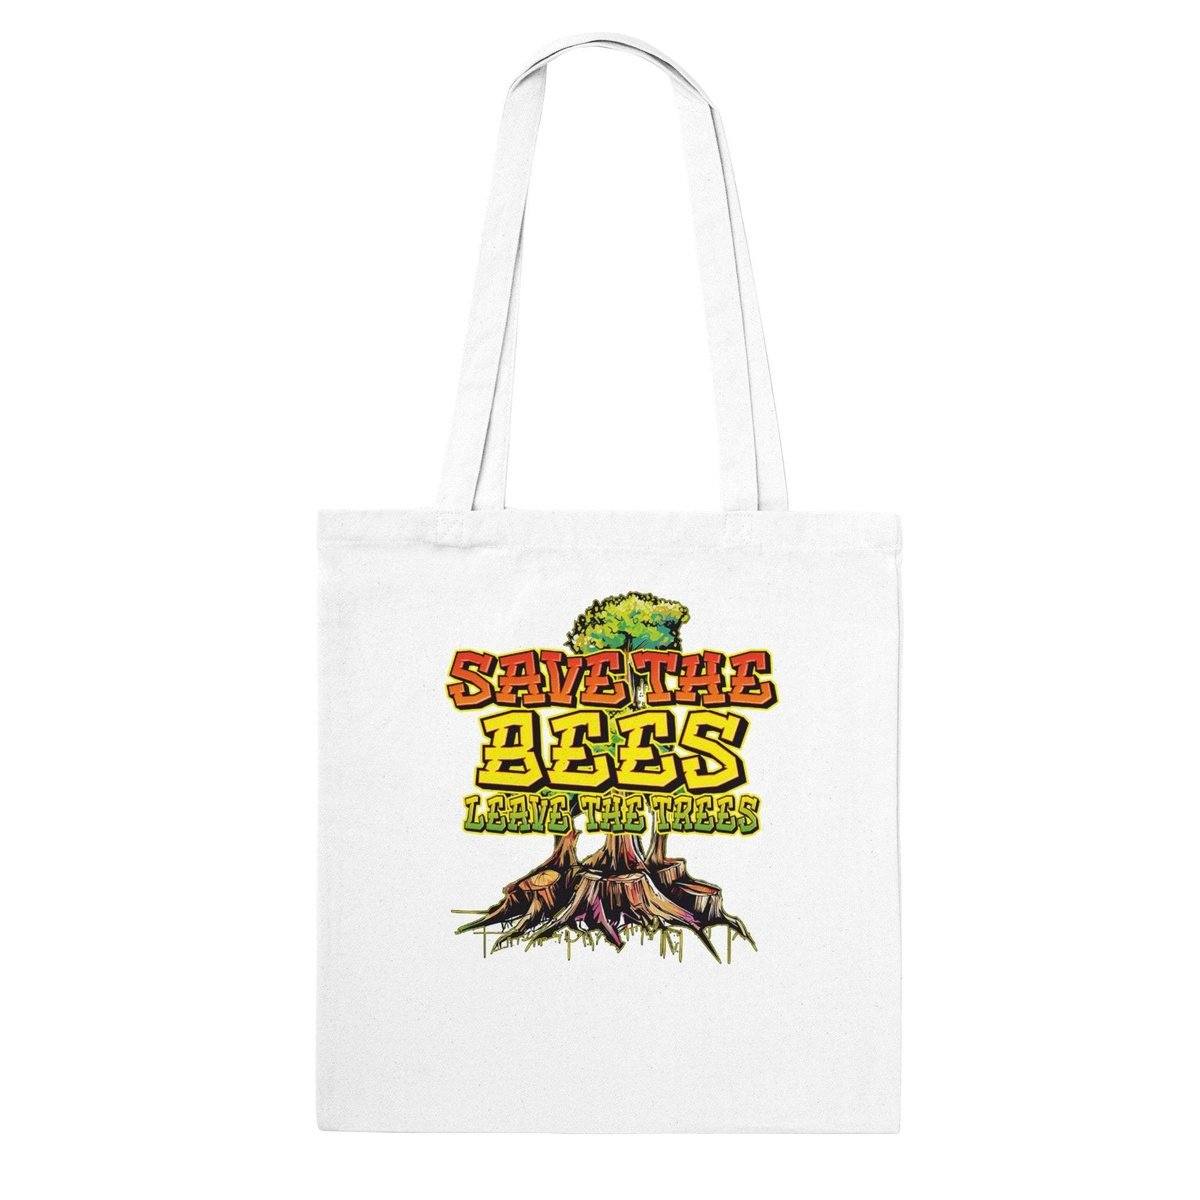 Save The Bees Tote Bag - Leave The Trees - Stumps - Classic Tote Bag Australia Online Color